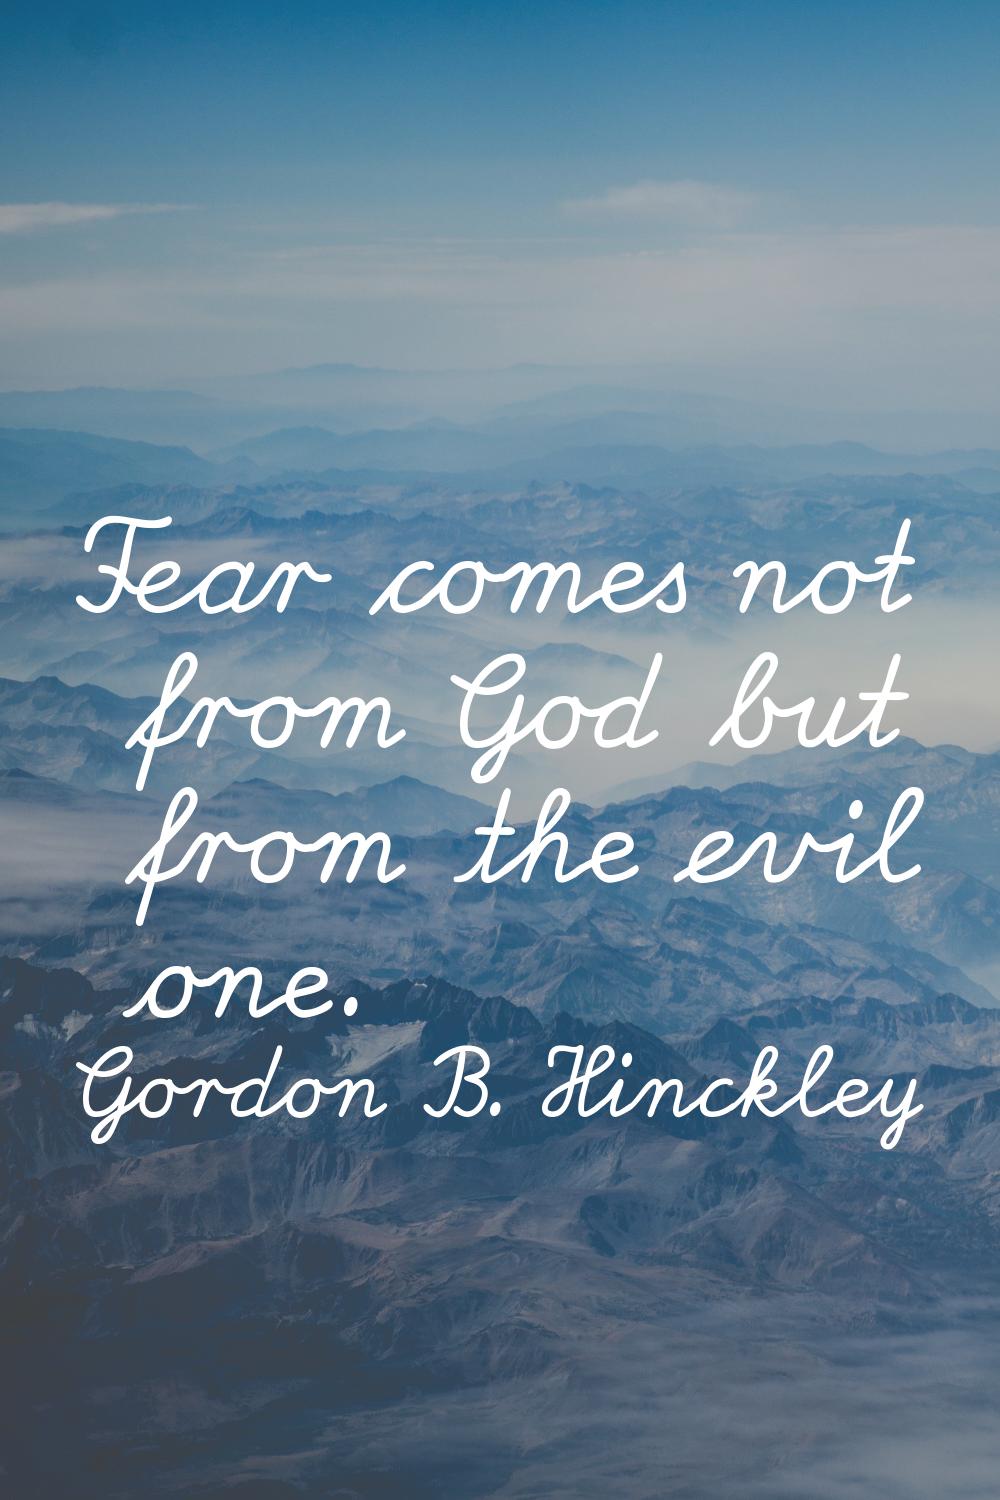 Fear comes not from God but from the evil one.